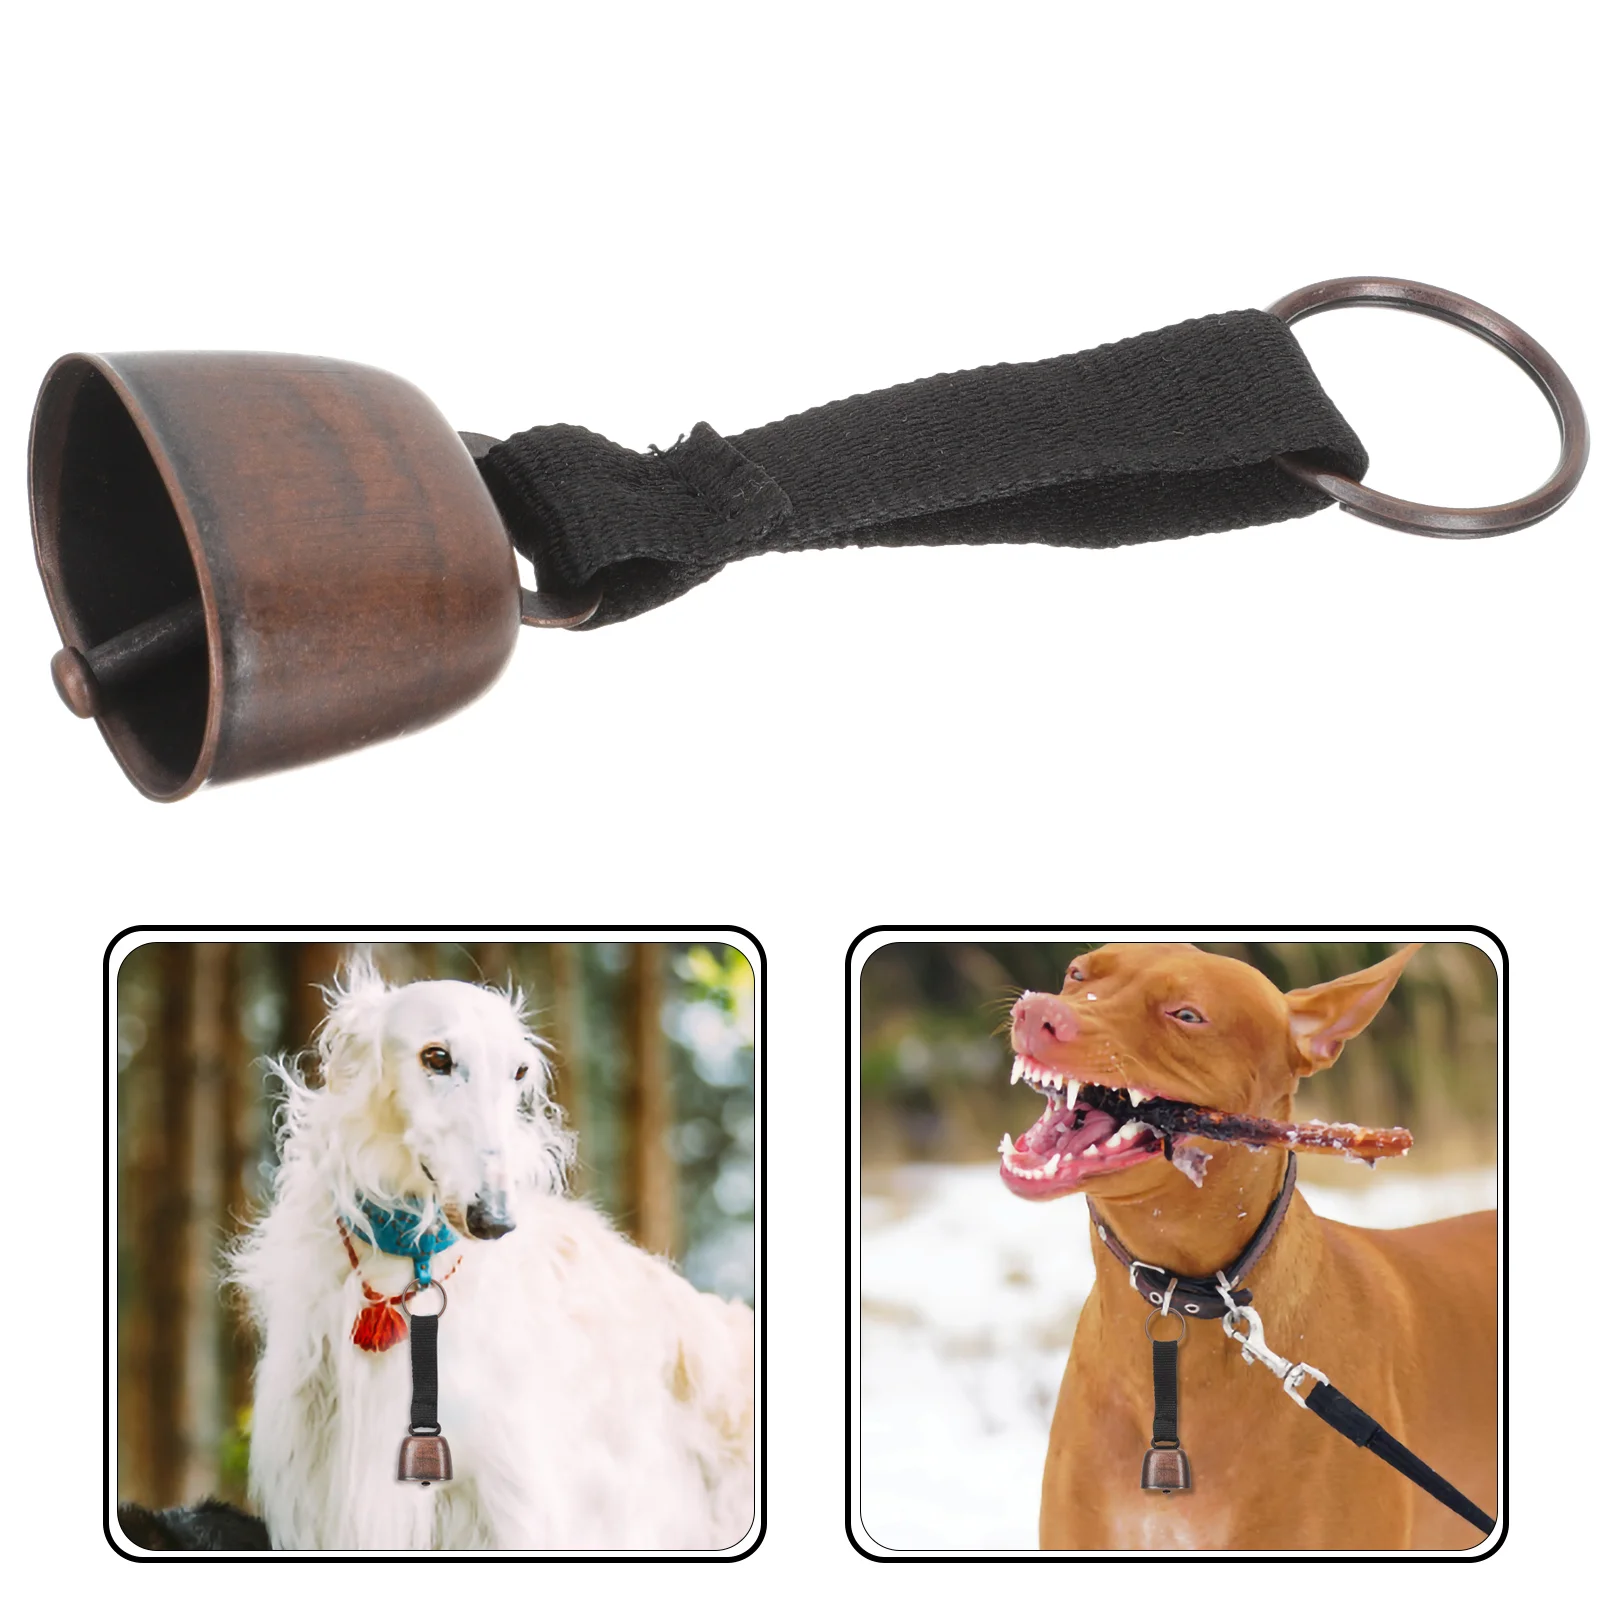 

Bear Repelling Bell Exercise Accessories Hiking Bell Rural Goat Collars Bells Copper Outdoor Alarming Bells Travel